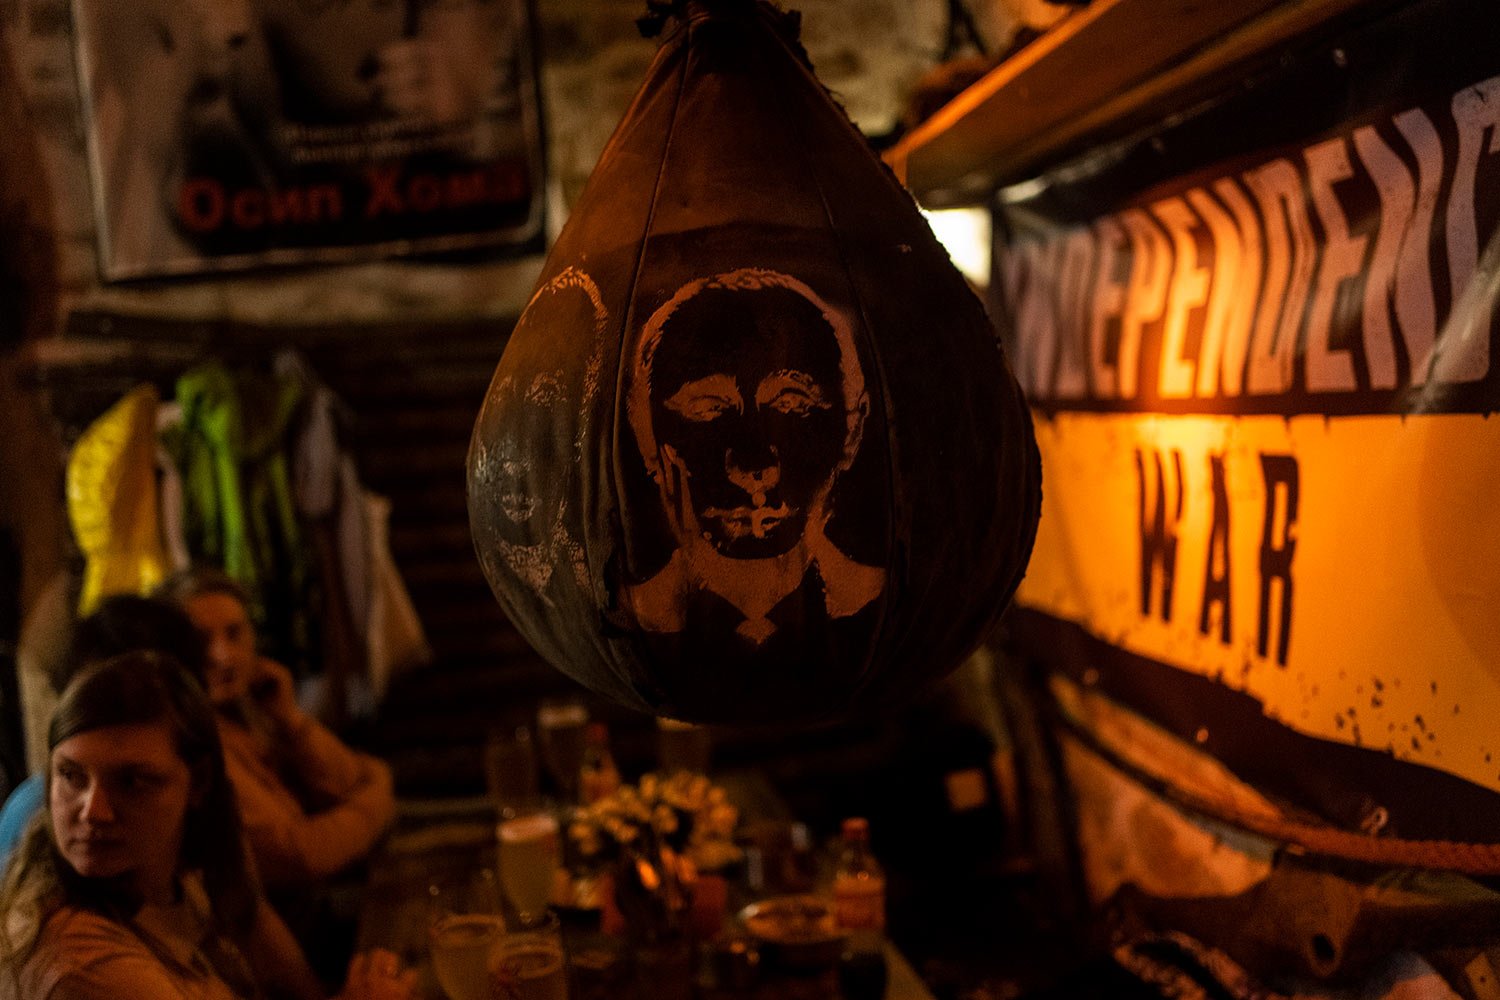  A boxing bag with a drawing of Russian President Vladimir Putin's face hangs inside a bar in downtown Lviv, western Ukraine, Tuesday, March 22, 2022. (AP Photo/Bernat Armangue) 